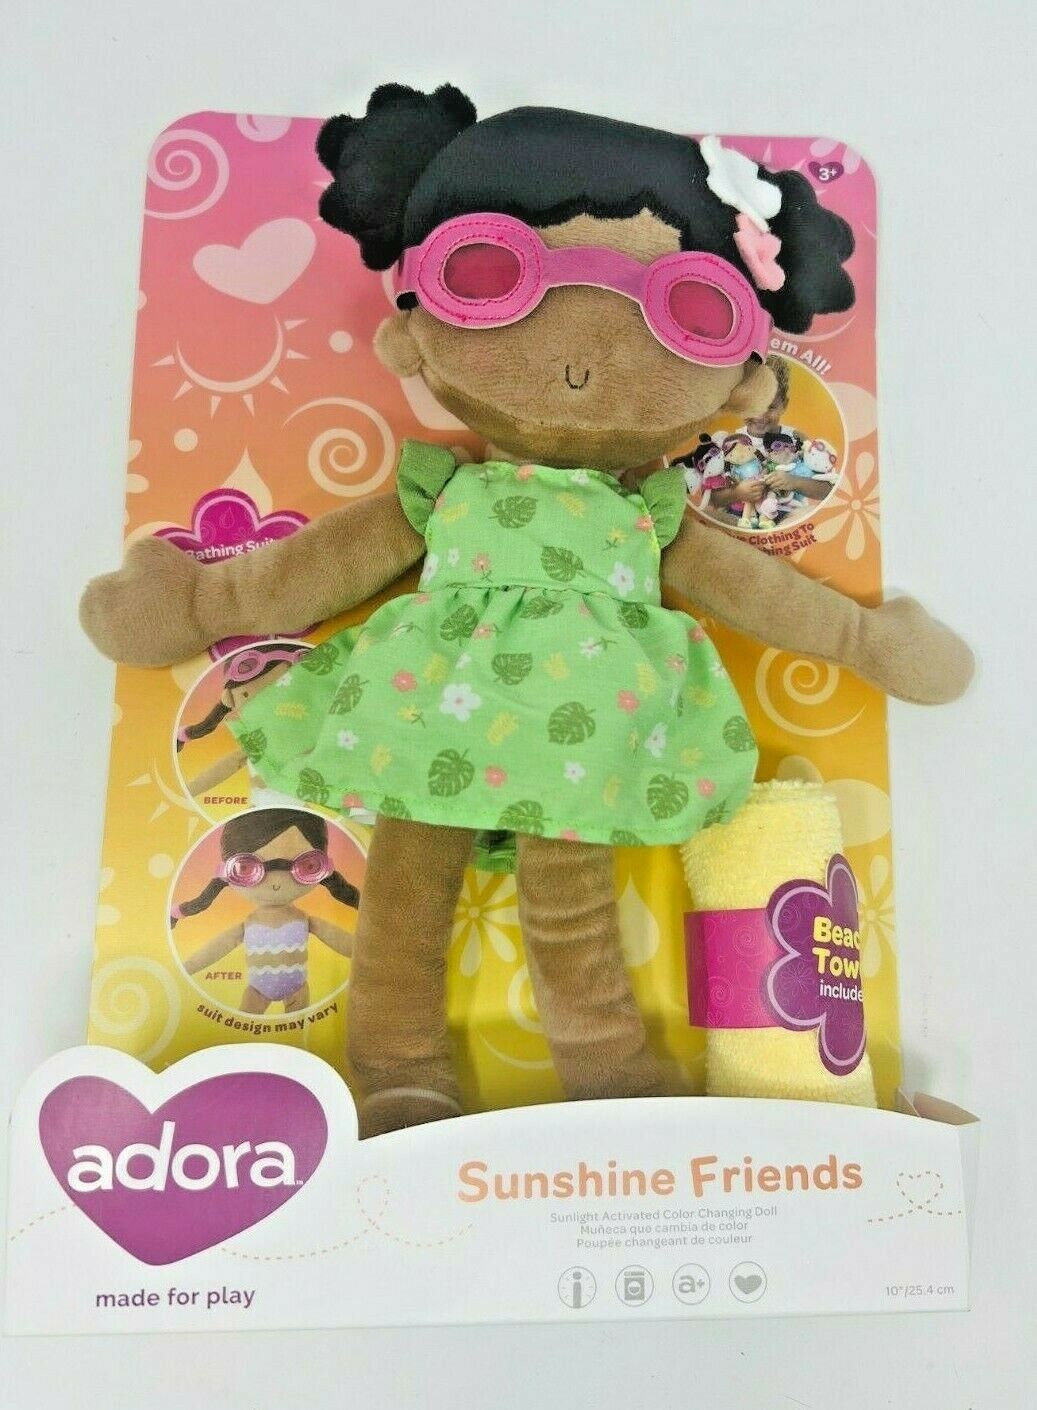 Adora Sunshine Friends Skye Doll with Color Changing Bathing Suit & Accessories